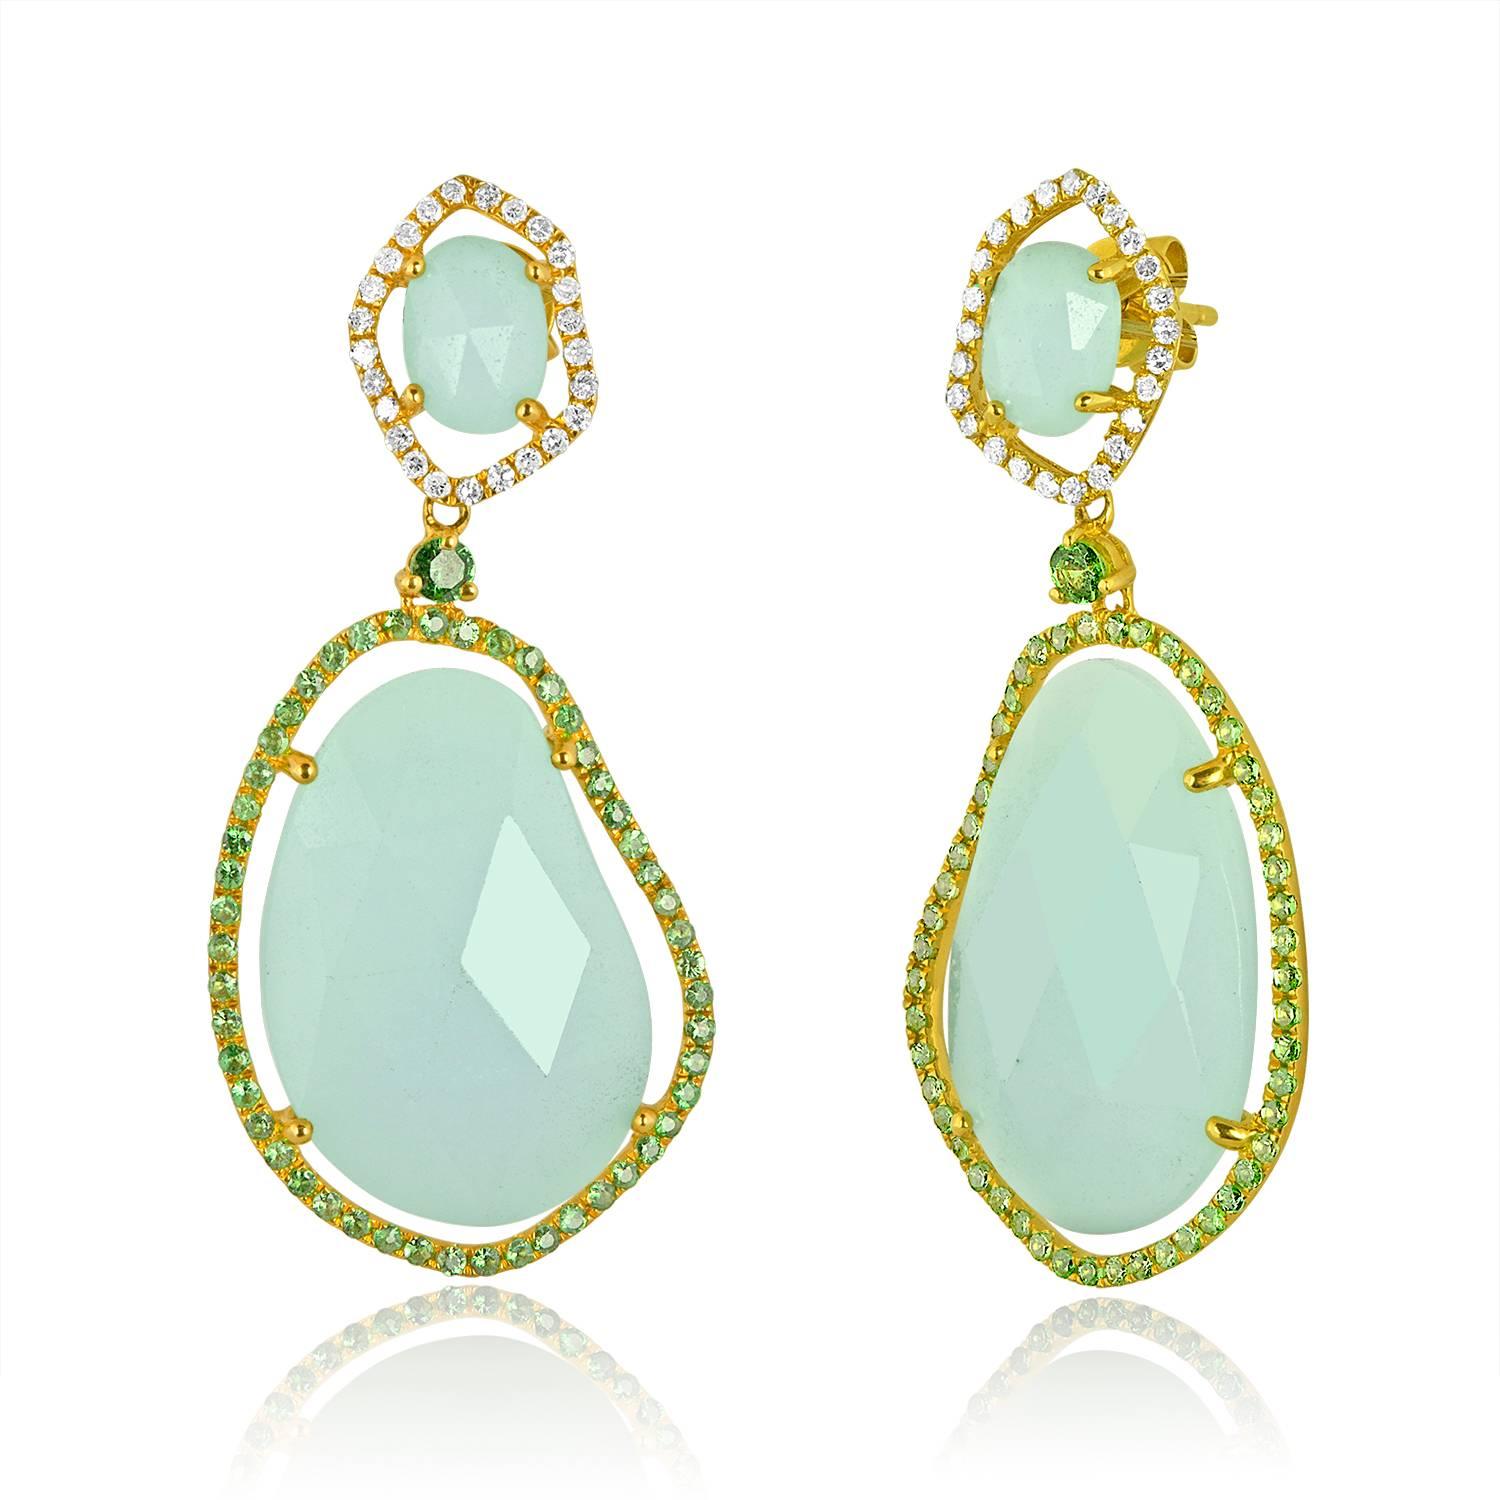 Amazonite Stones surrounded by Green Garnets and Diamonds 
Set in 14K Yellow Gold
30.36Ct of Amazonite
1.11Ct of Green Garnet
0.34Ct of Diamonds G SI
The earrings measure 1.75